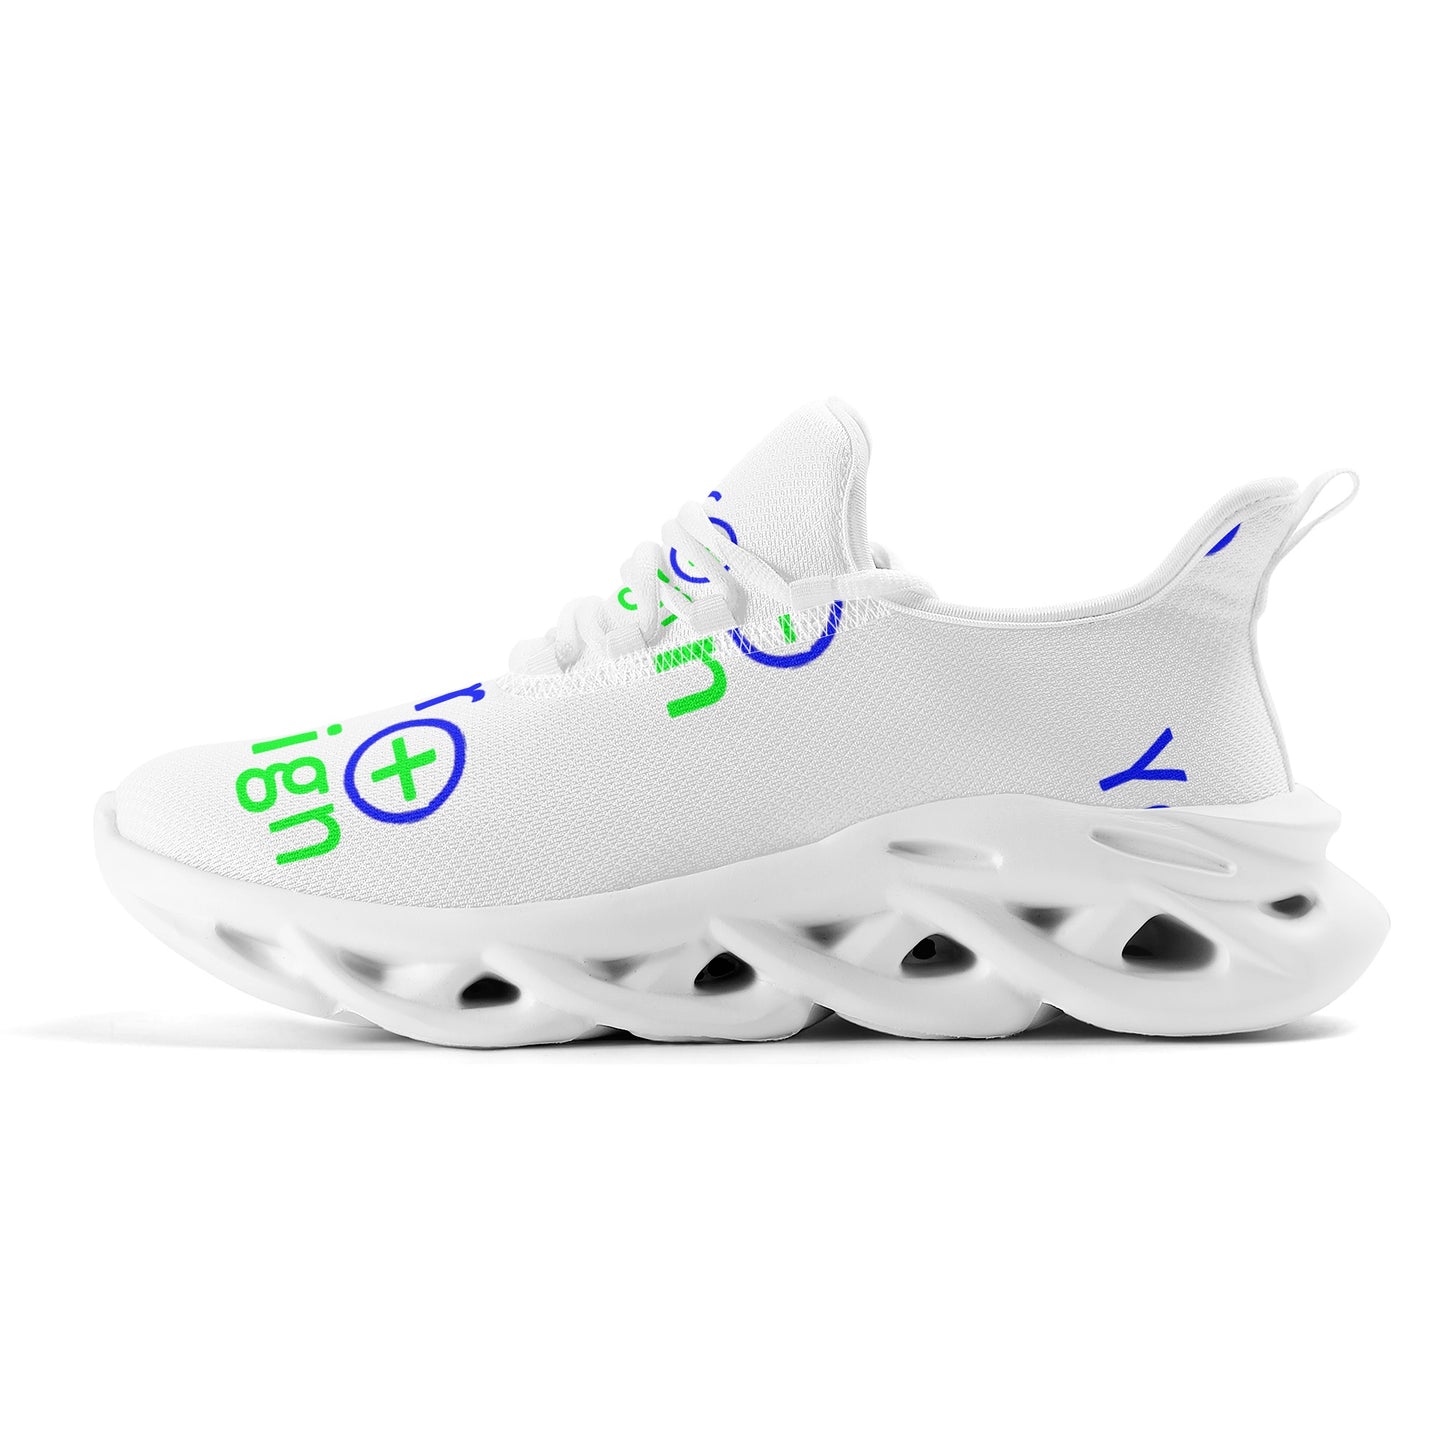 Womens Premium M-sole Sneakers-Your design customized 